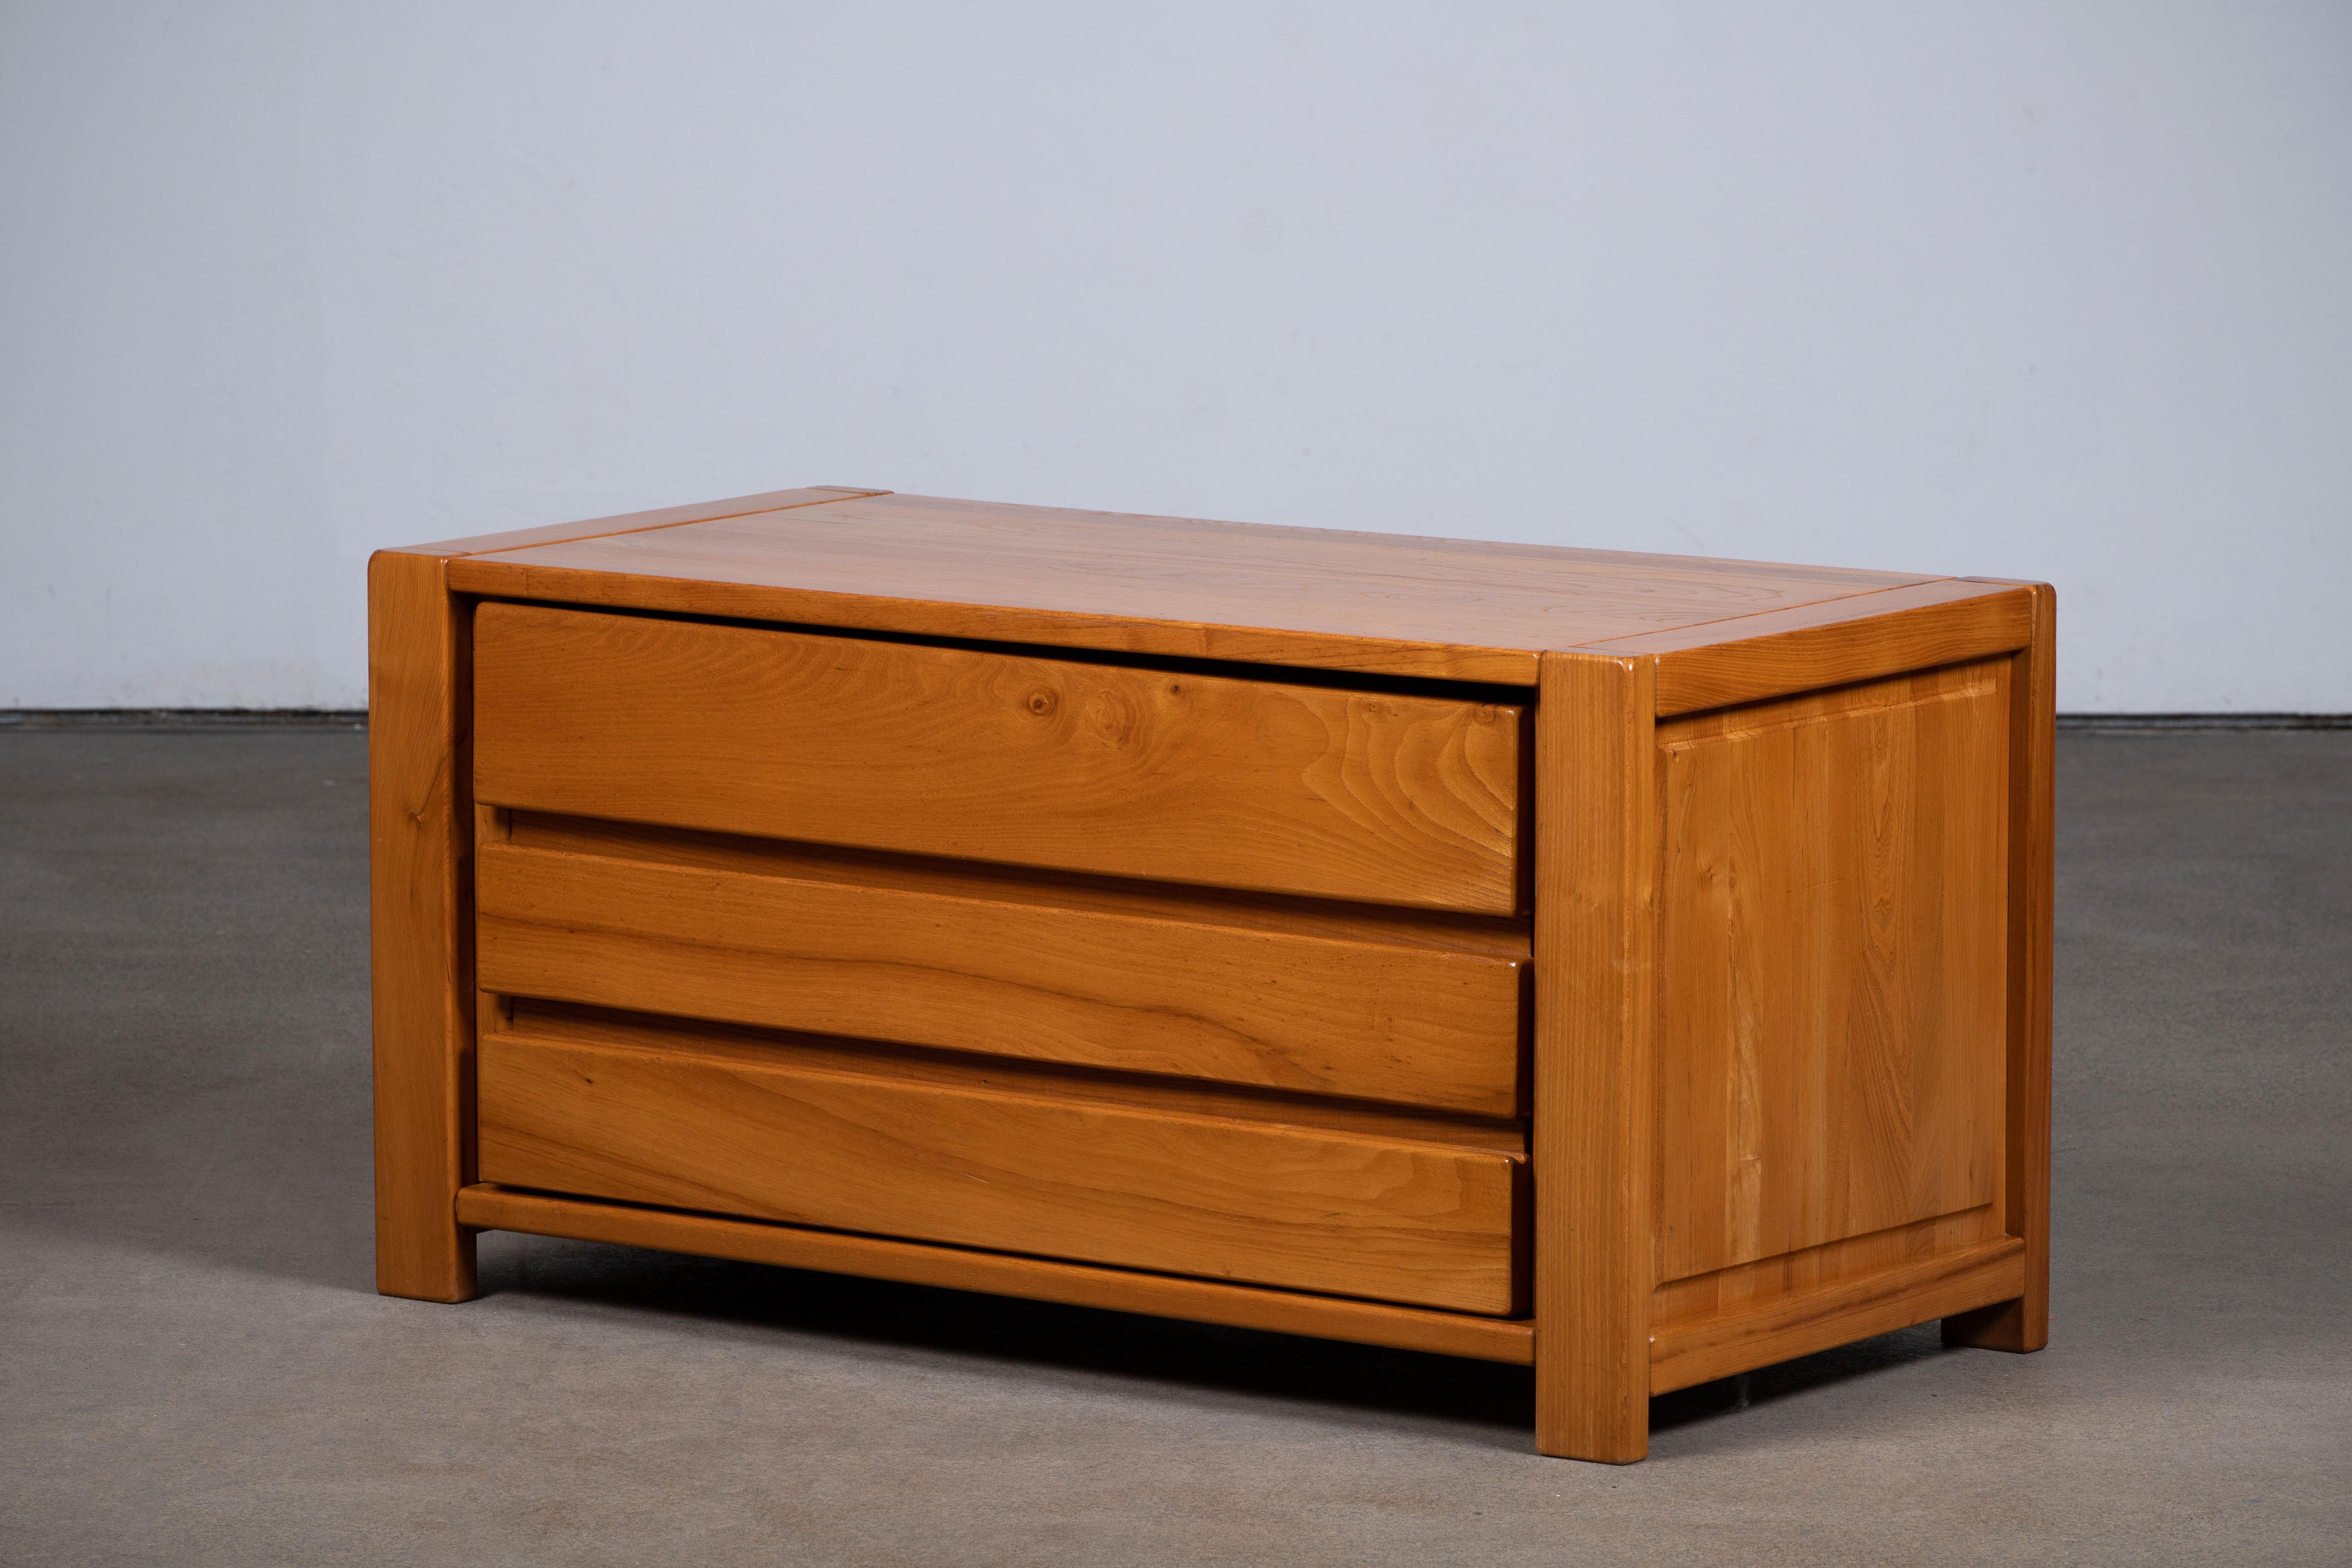 Chapo Insp Sideboard in Solid Elm, France, 1970s For Sale 1